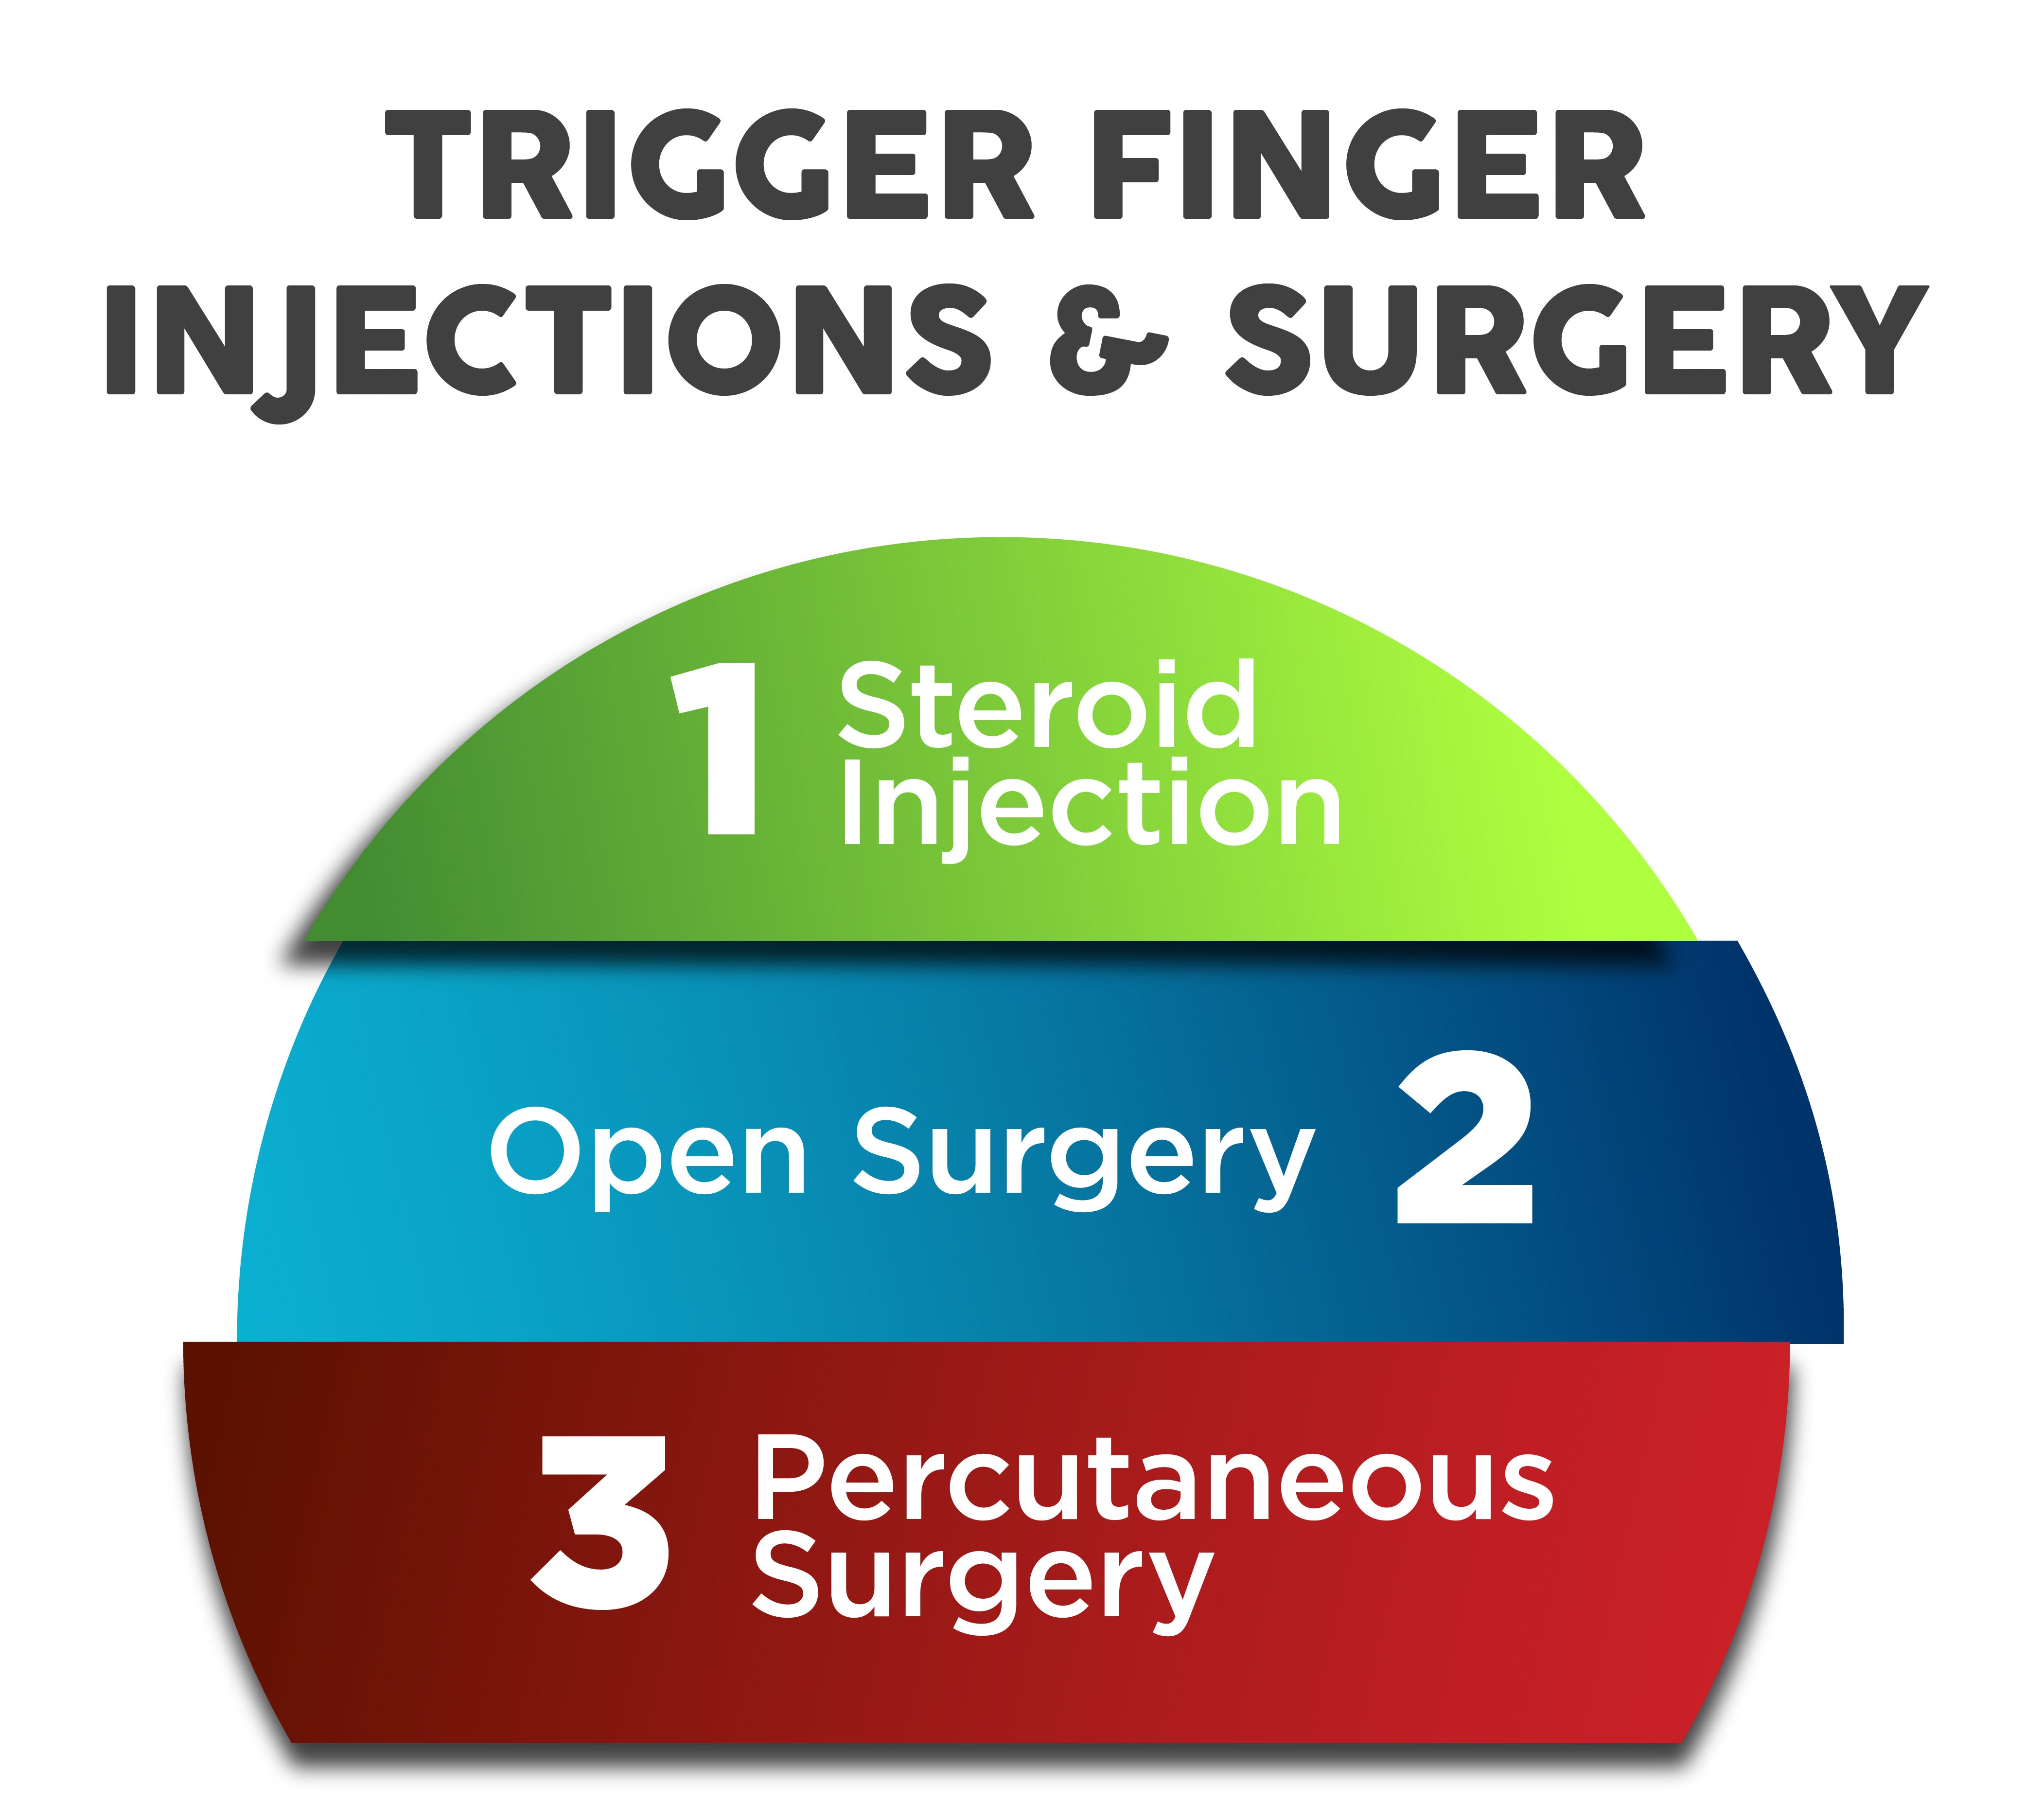 Steroid injections to fix trigger finger of the hand before percutaneous surgery